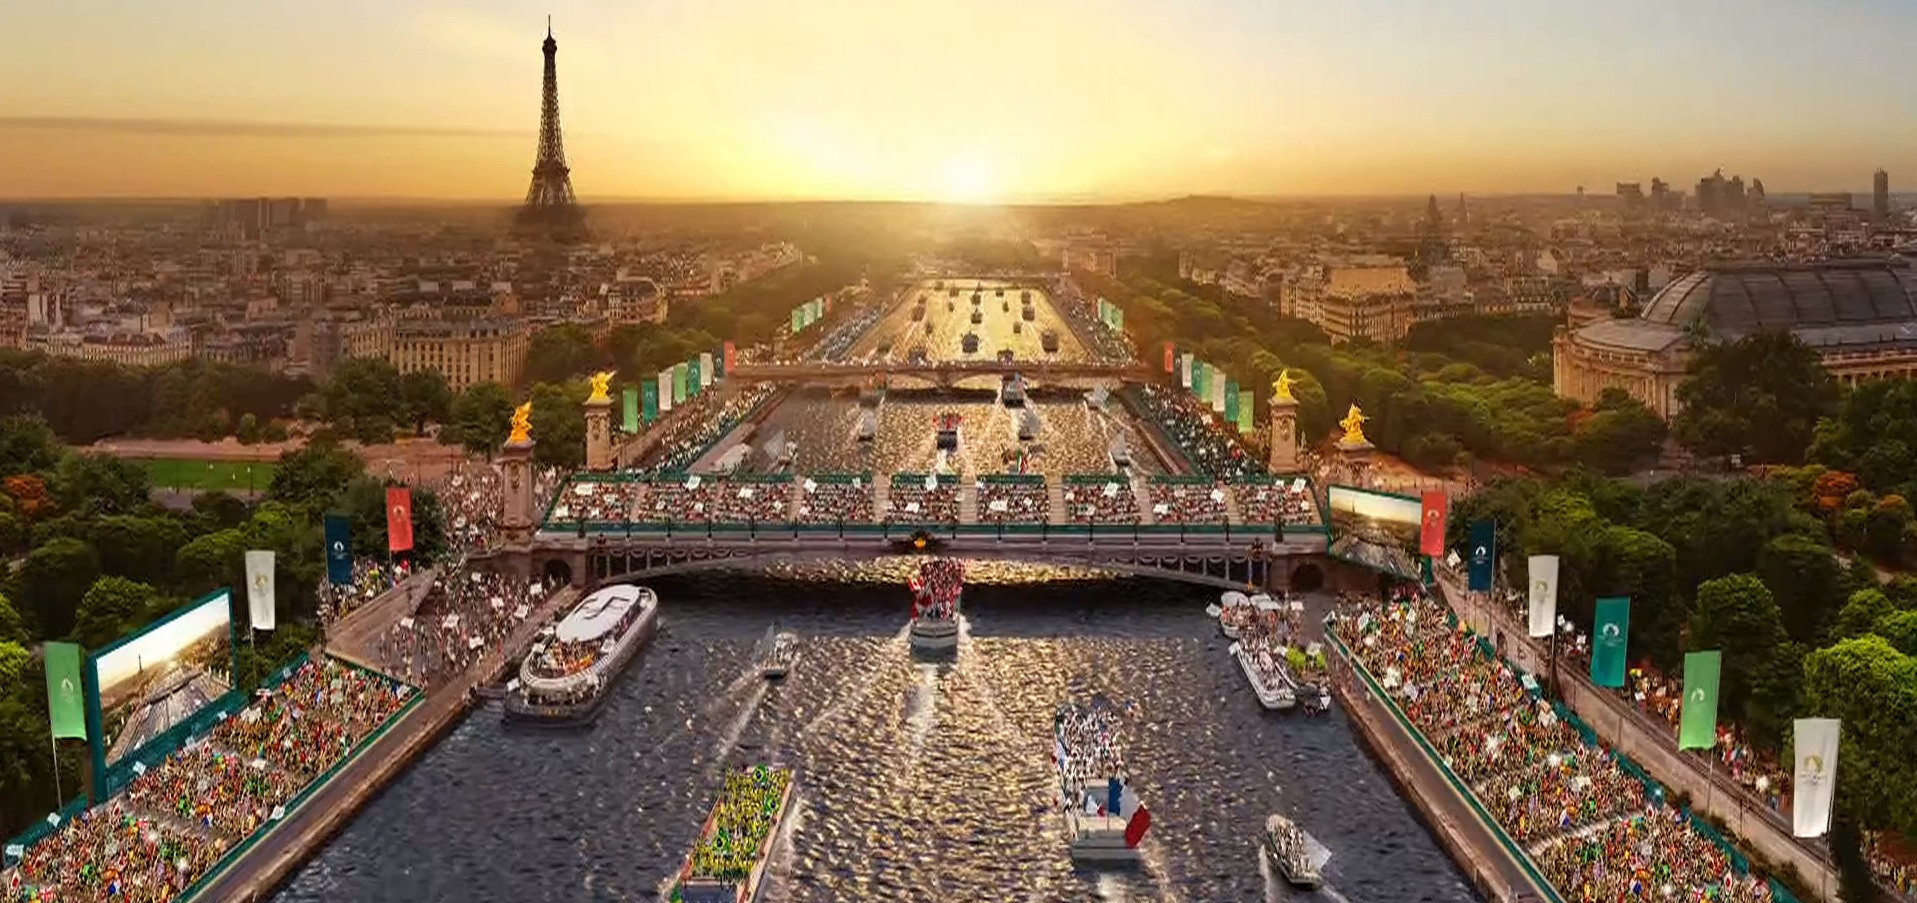 Organisers hope for 600,000 spectators to line the River Seine for the Olympic Games Opening Ceremony on July 26 2024 ©Paris 2024